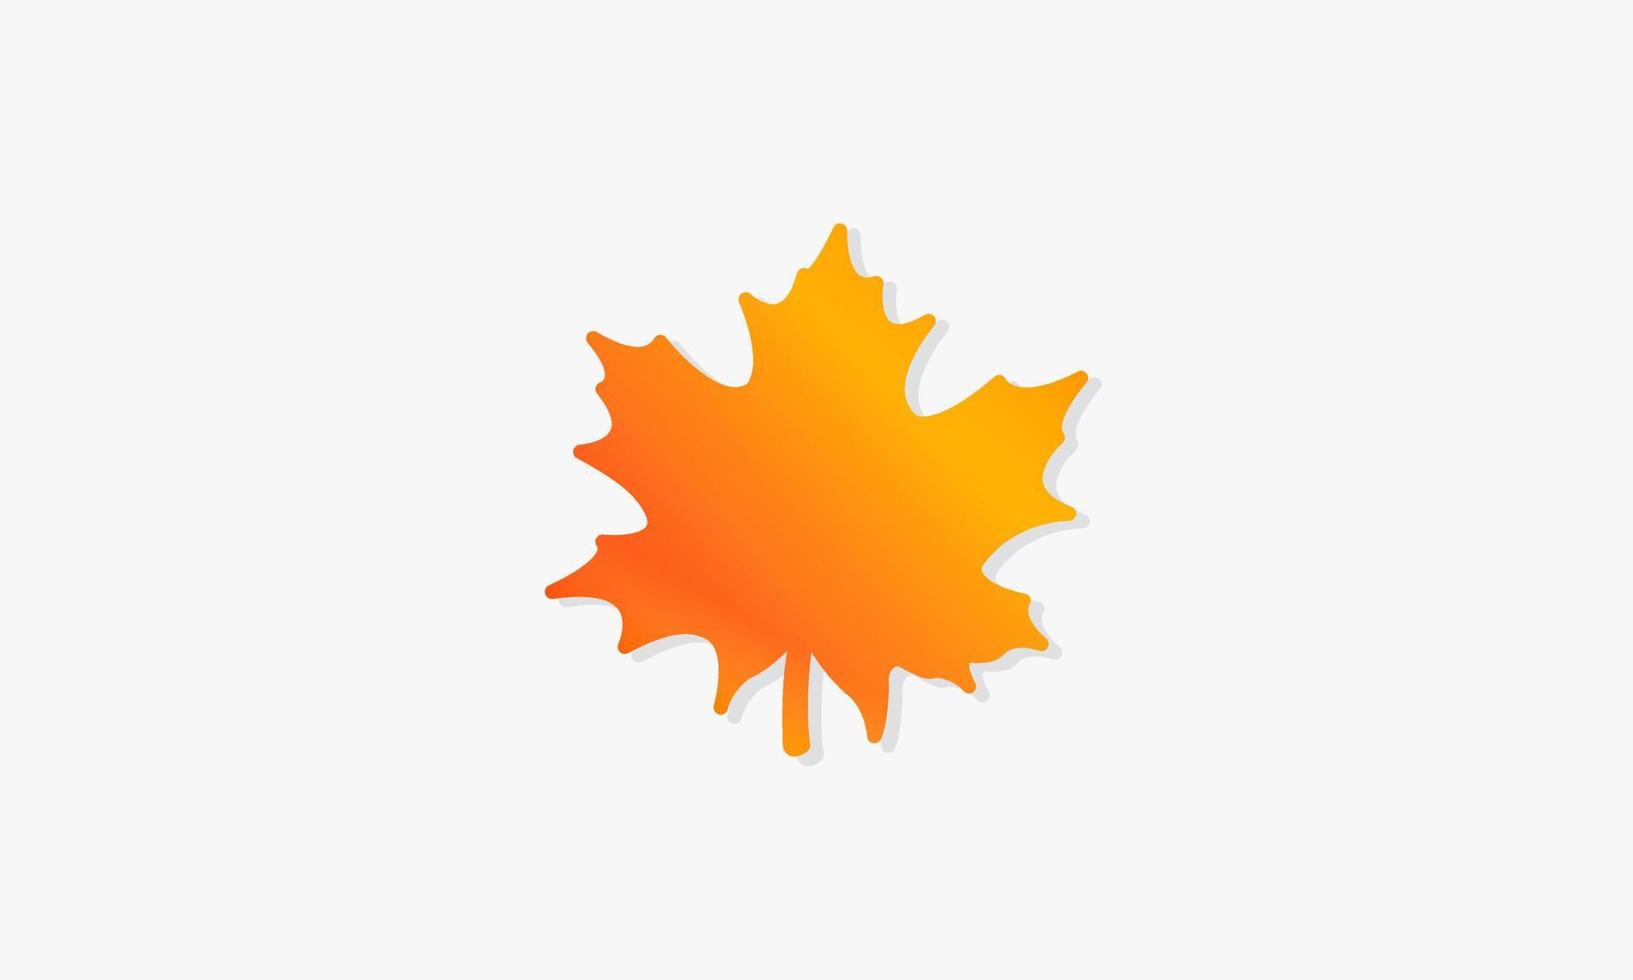 colorful maple leaf with shadow design vector illustration.